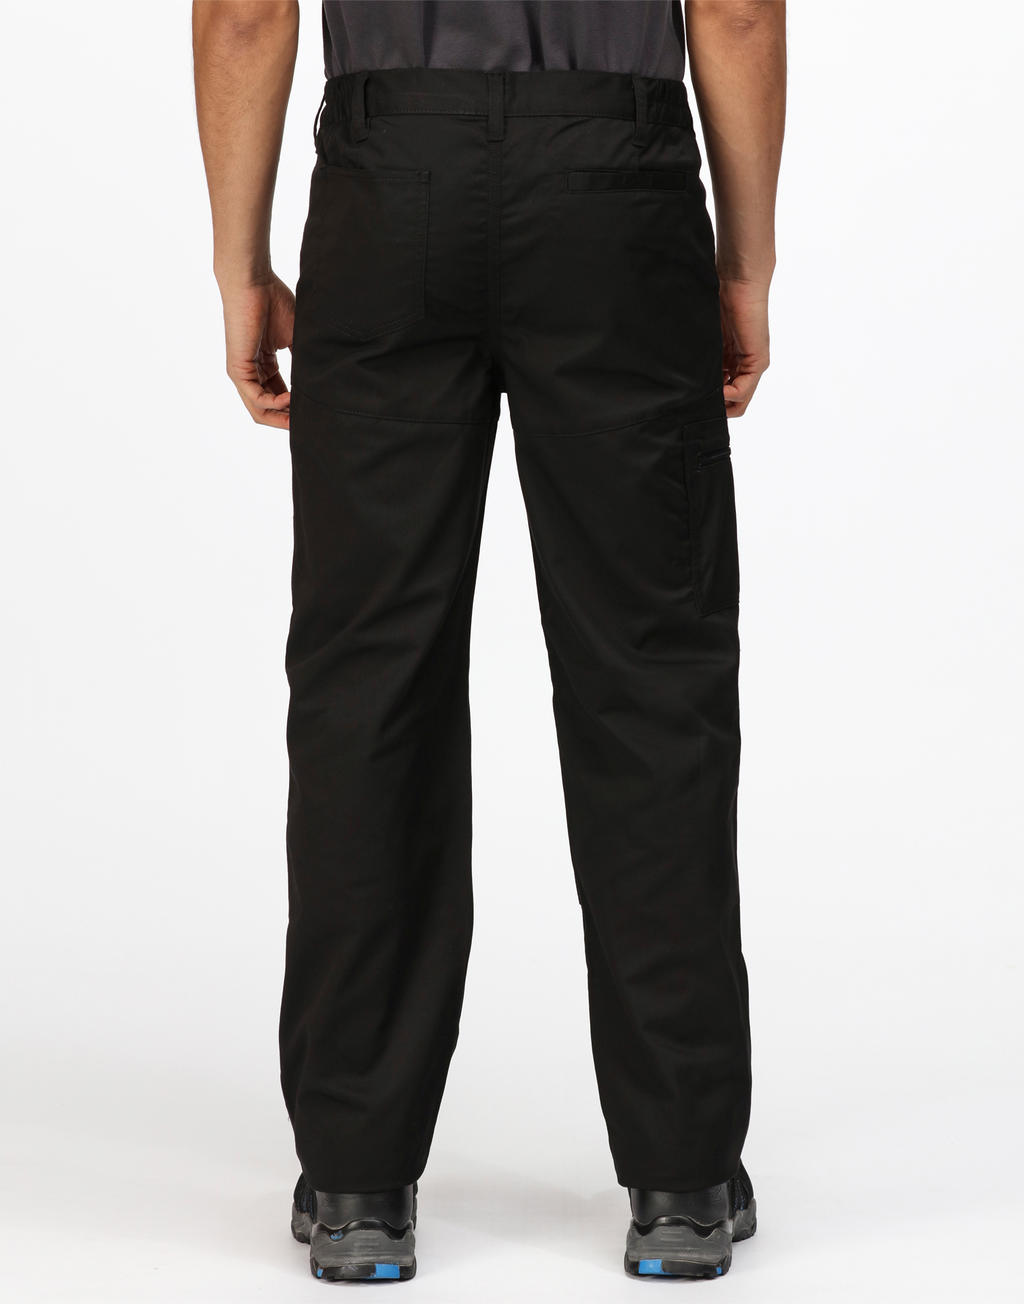  Pro Action Trousers (Short) in Farbe Black